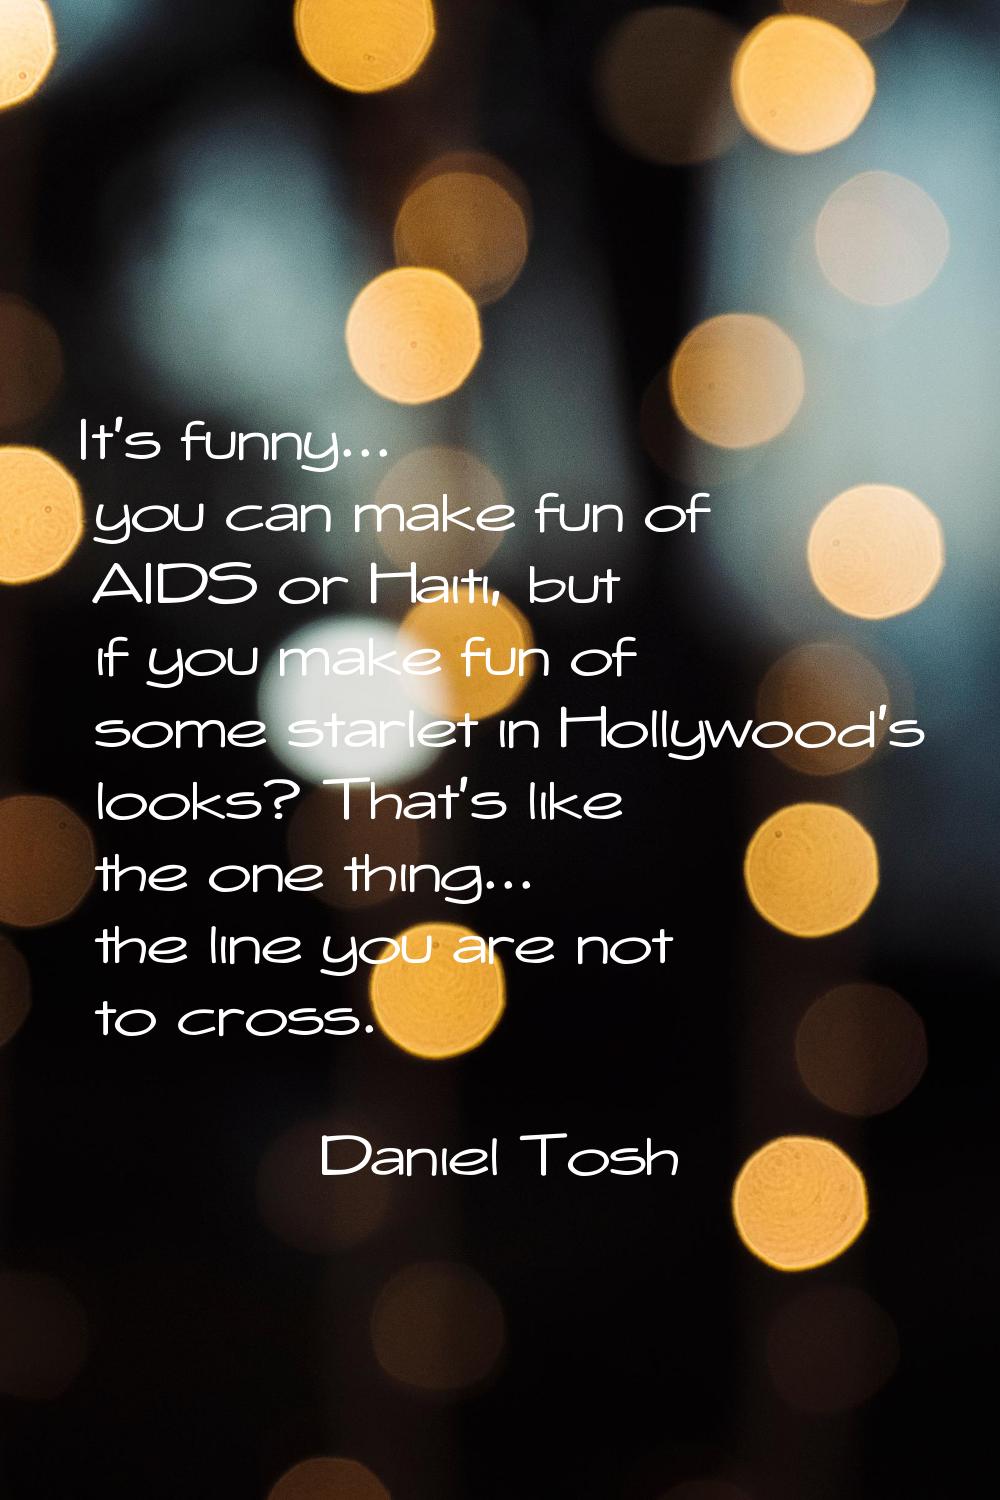 It's funny... you can make fun of AIDS or Haiti, but if you make fun of some starlet in Hollywood's